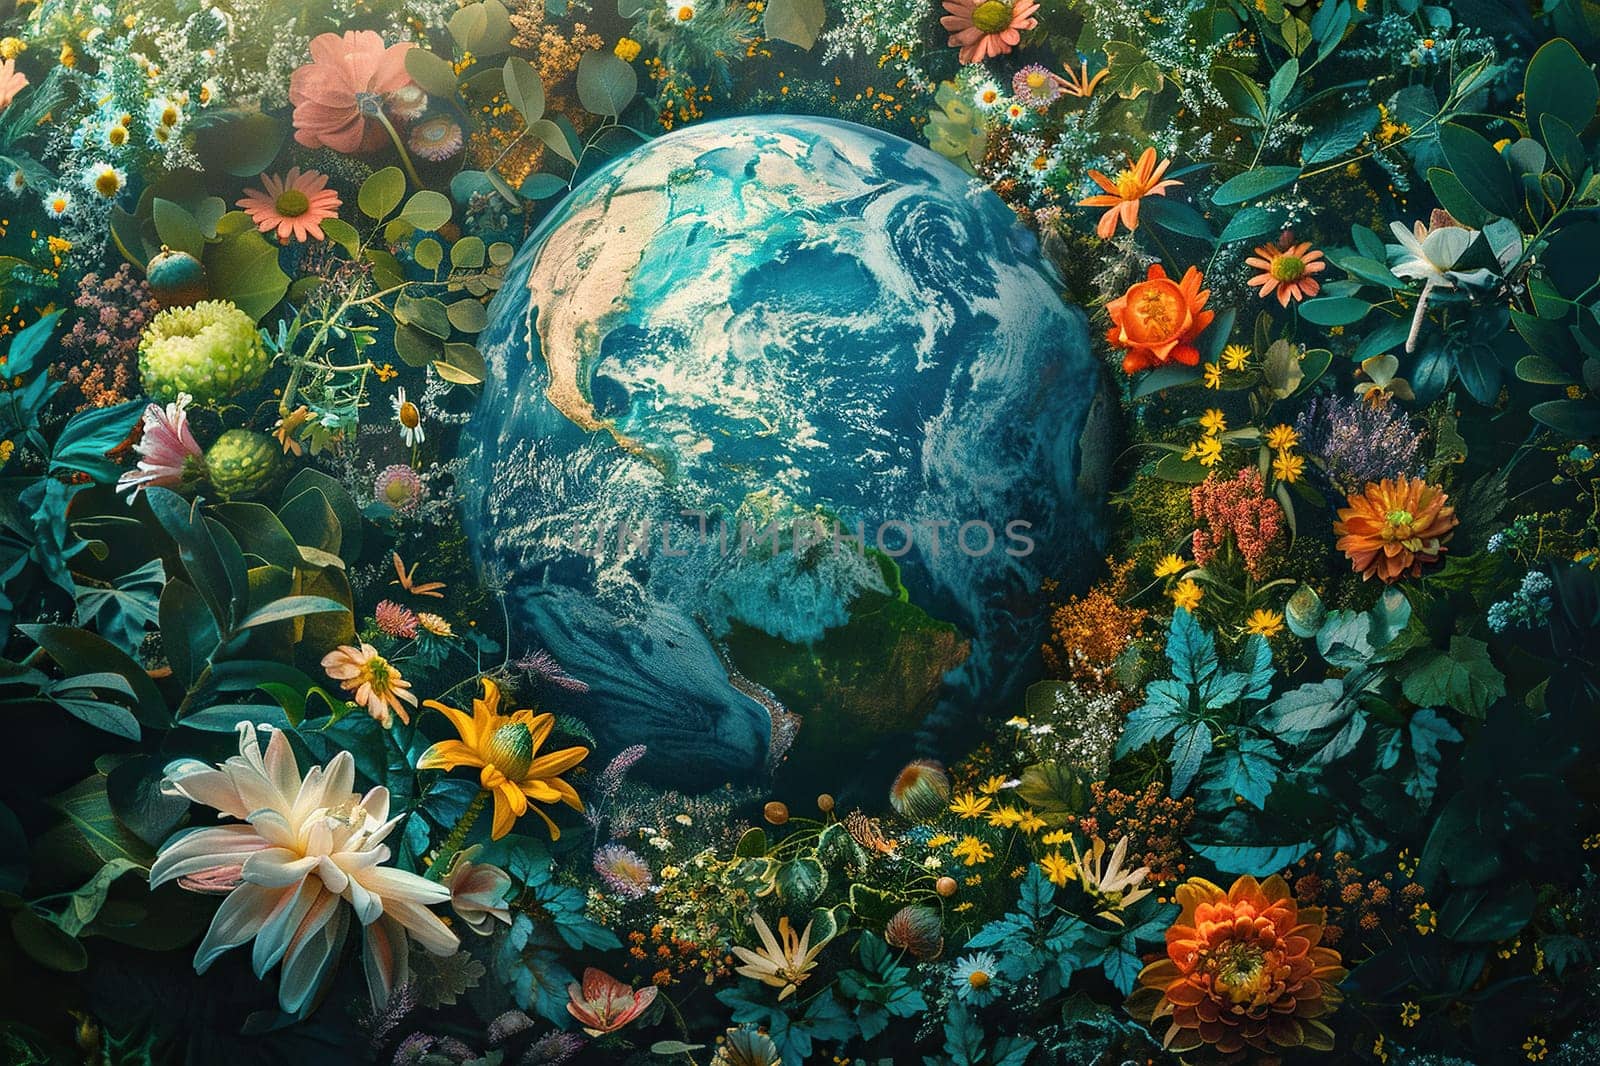 The globe is surrounded by many flowers and greenery. Generated by artificial intelligence by Vovmar